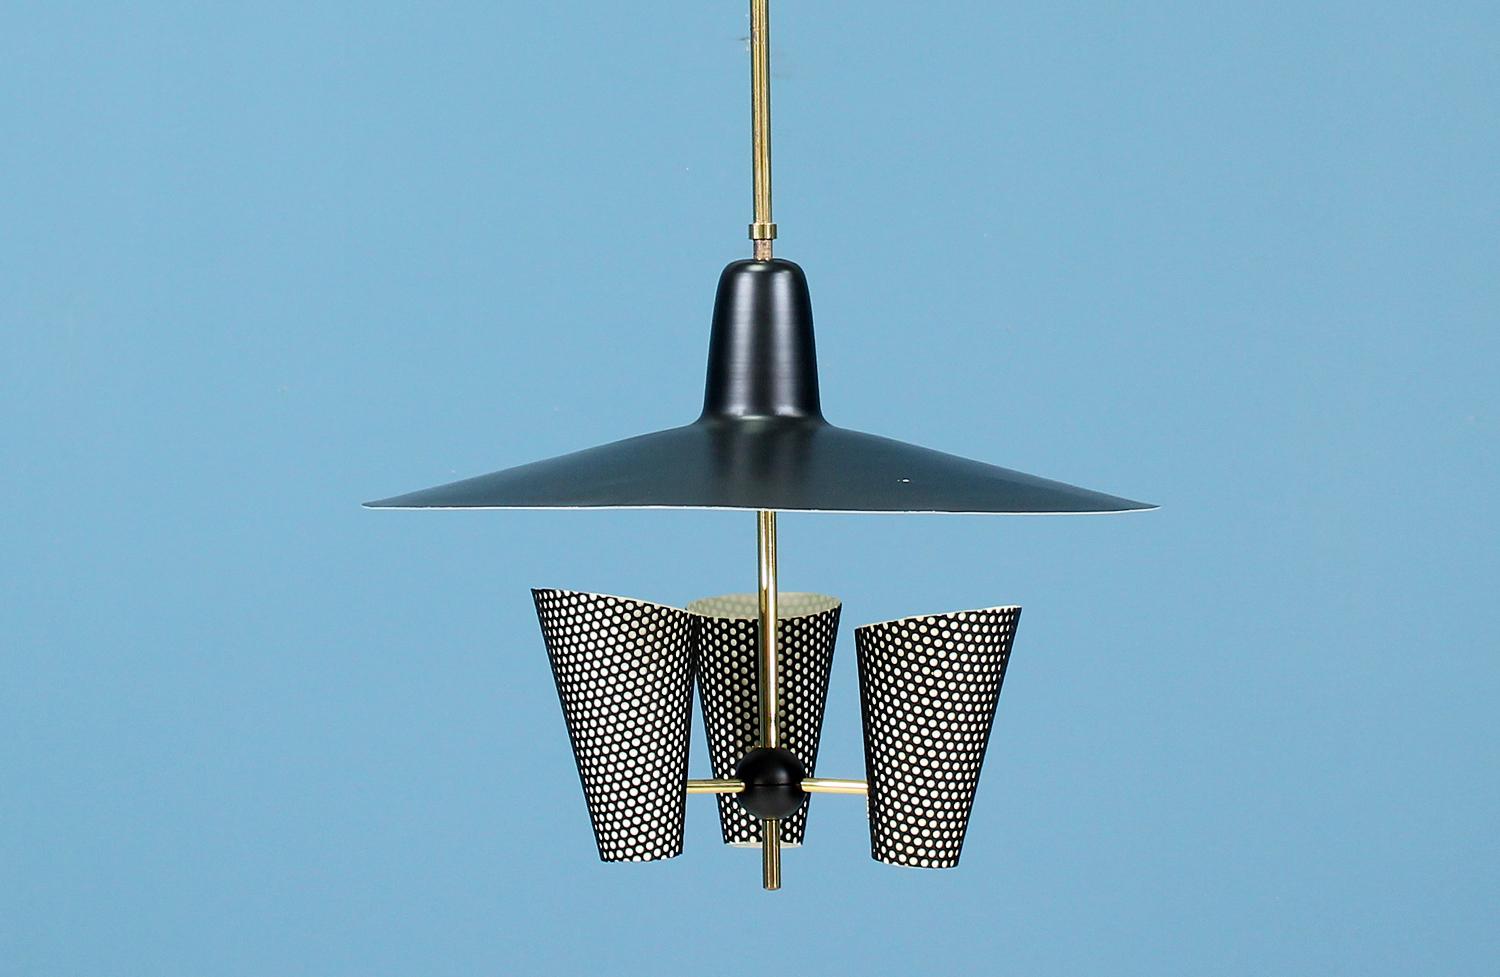 Dazzling ceiling light designed by Jacques Biny for Luminalite Edition in France, circa 1950s. A clean and simple design with a black enameled metal shade and three cones held by a ball joint arm with a brass structure. The mix of textures and